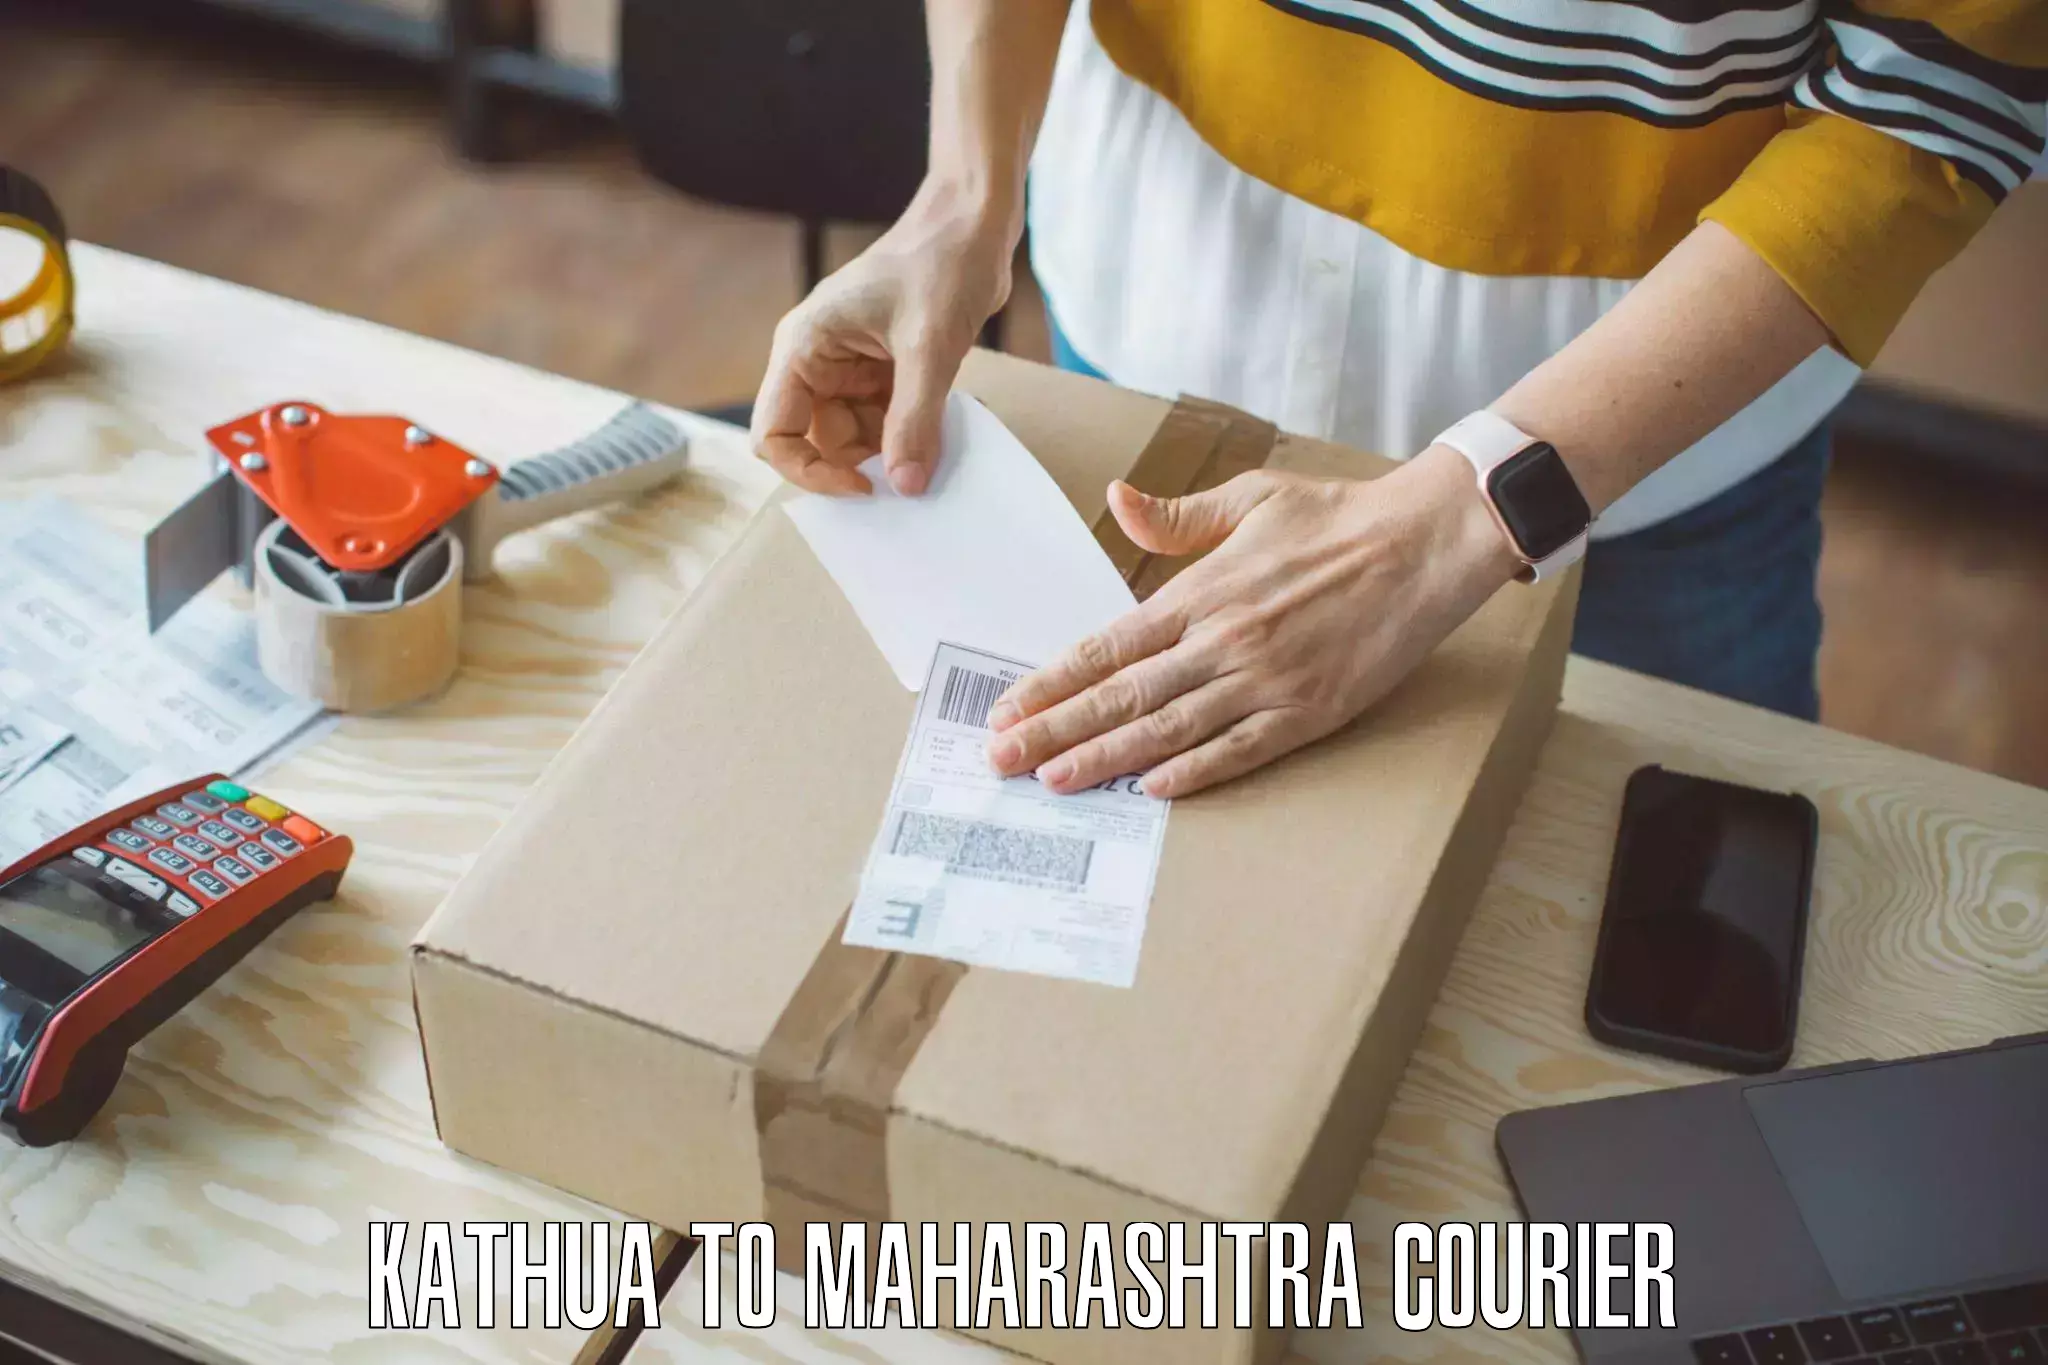 Furniture transport professionals Kathua to Nanded